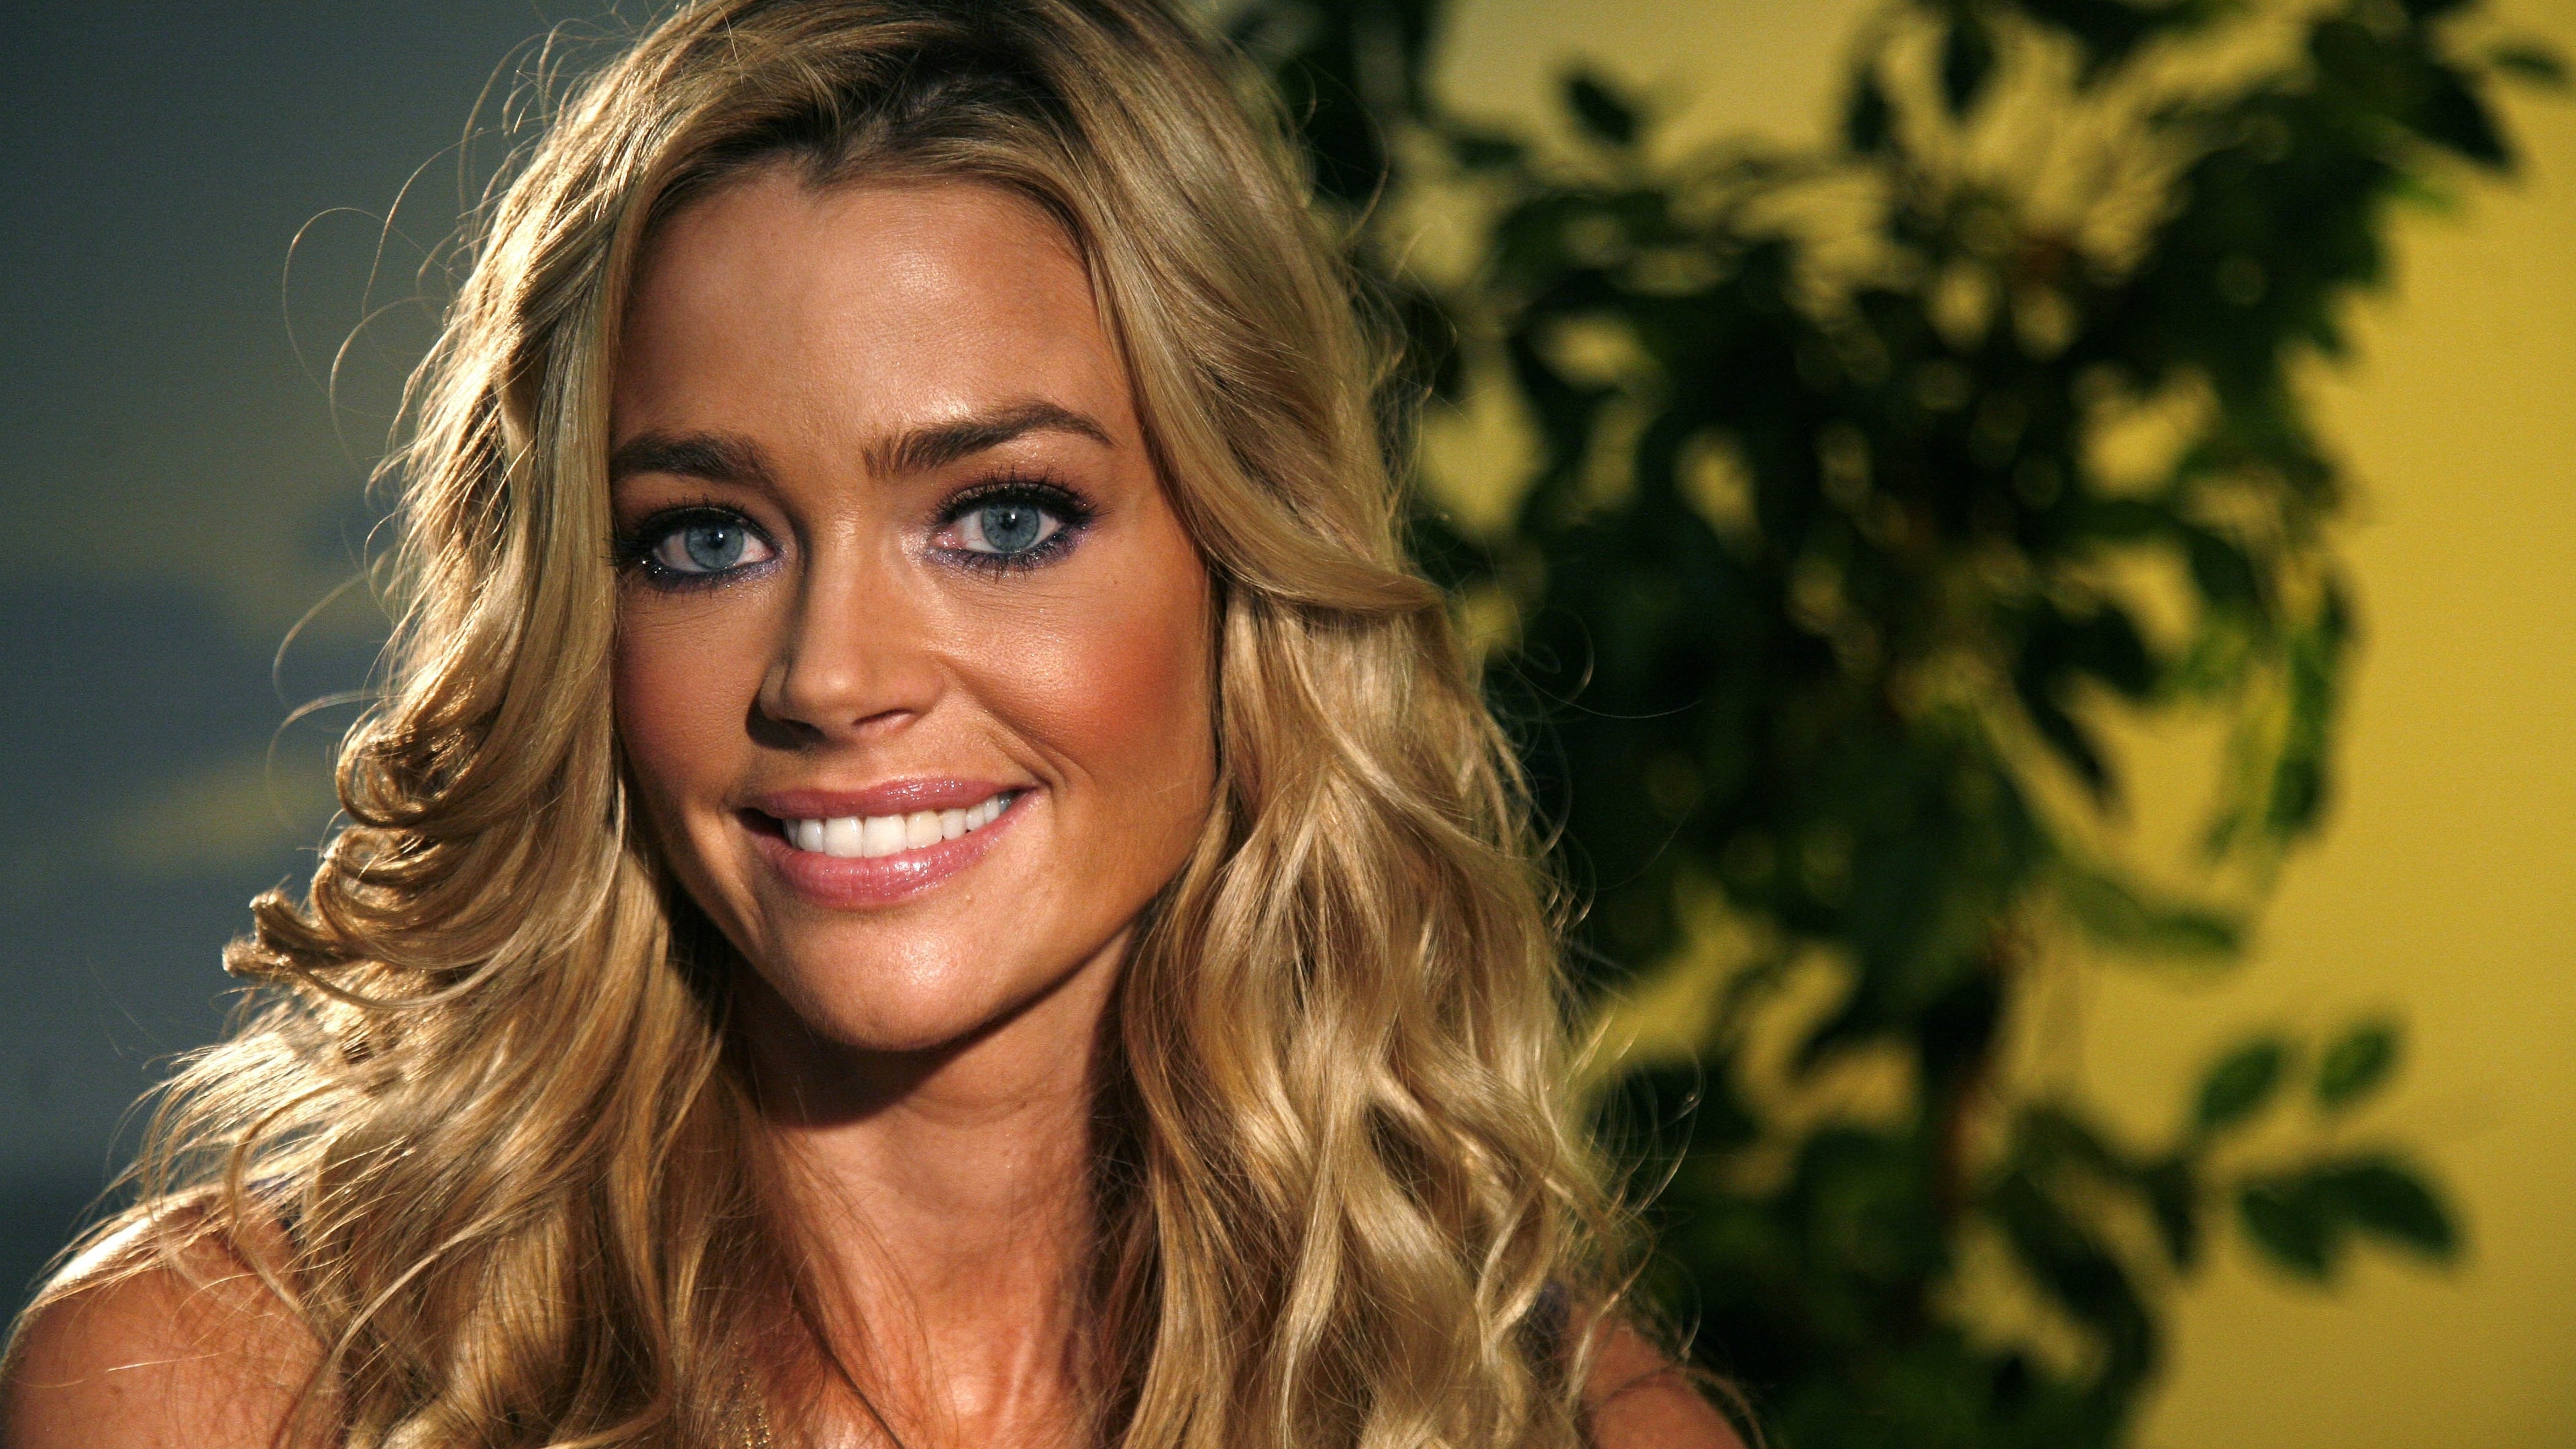 Denise Richards Tanned for 3840 x 2160 Ultra HD resolution